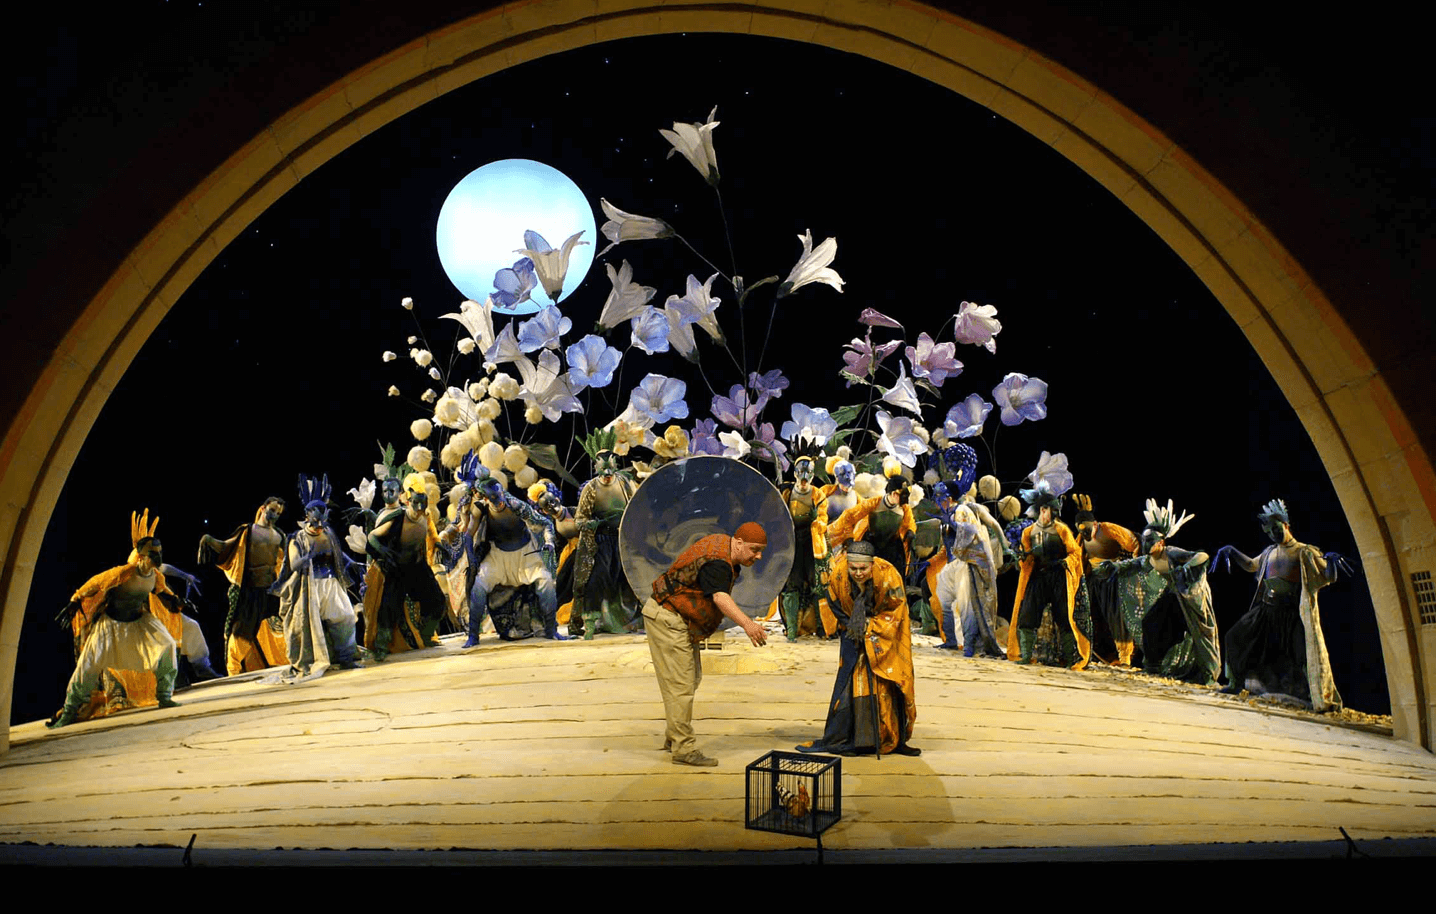 Opera “L'upupa”, a musical fantasy under the direction of Hans Werner Henze (2007). Photo: Javier at the Real